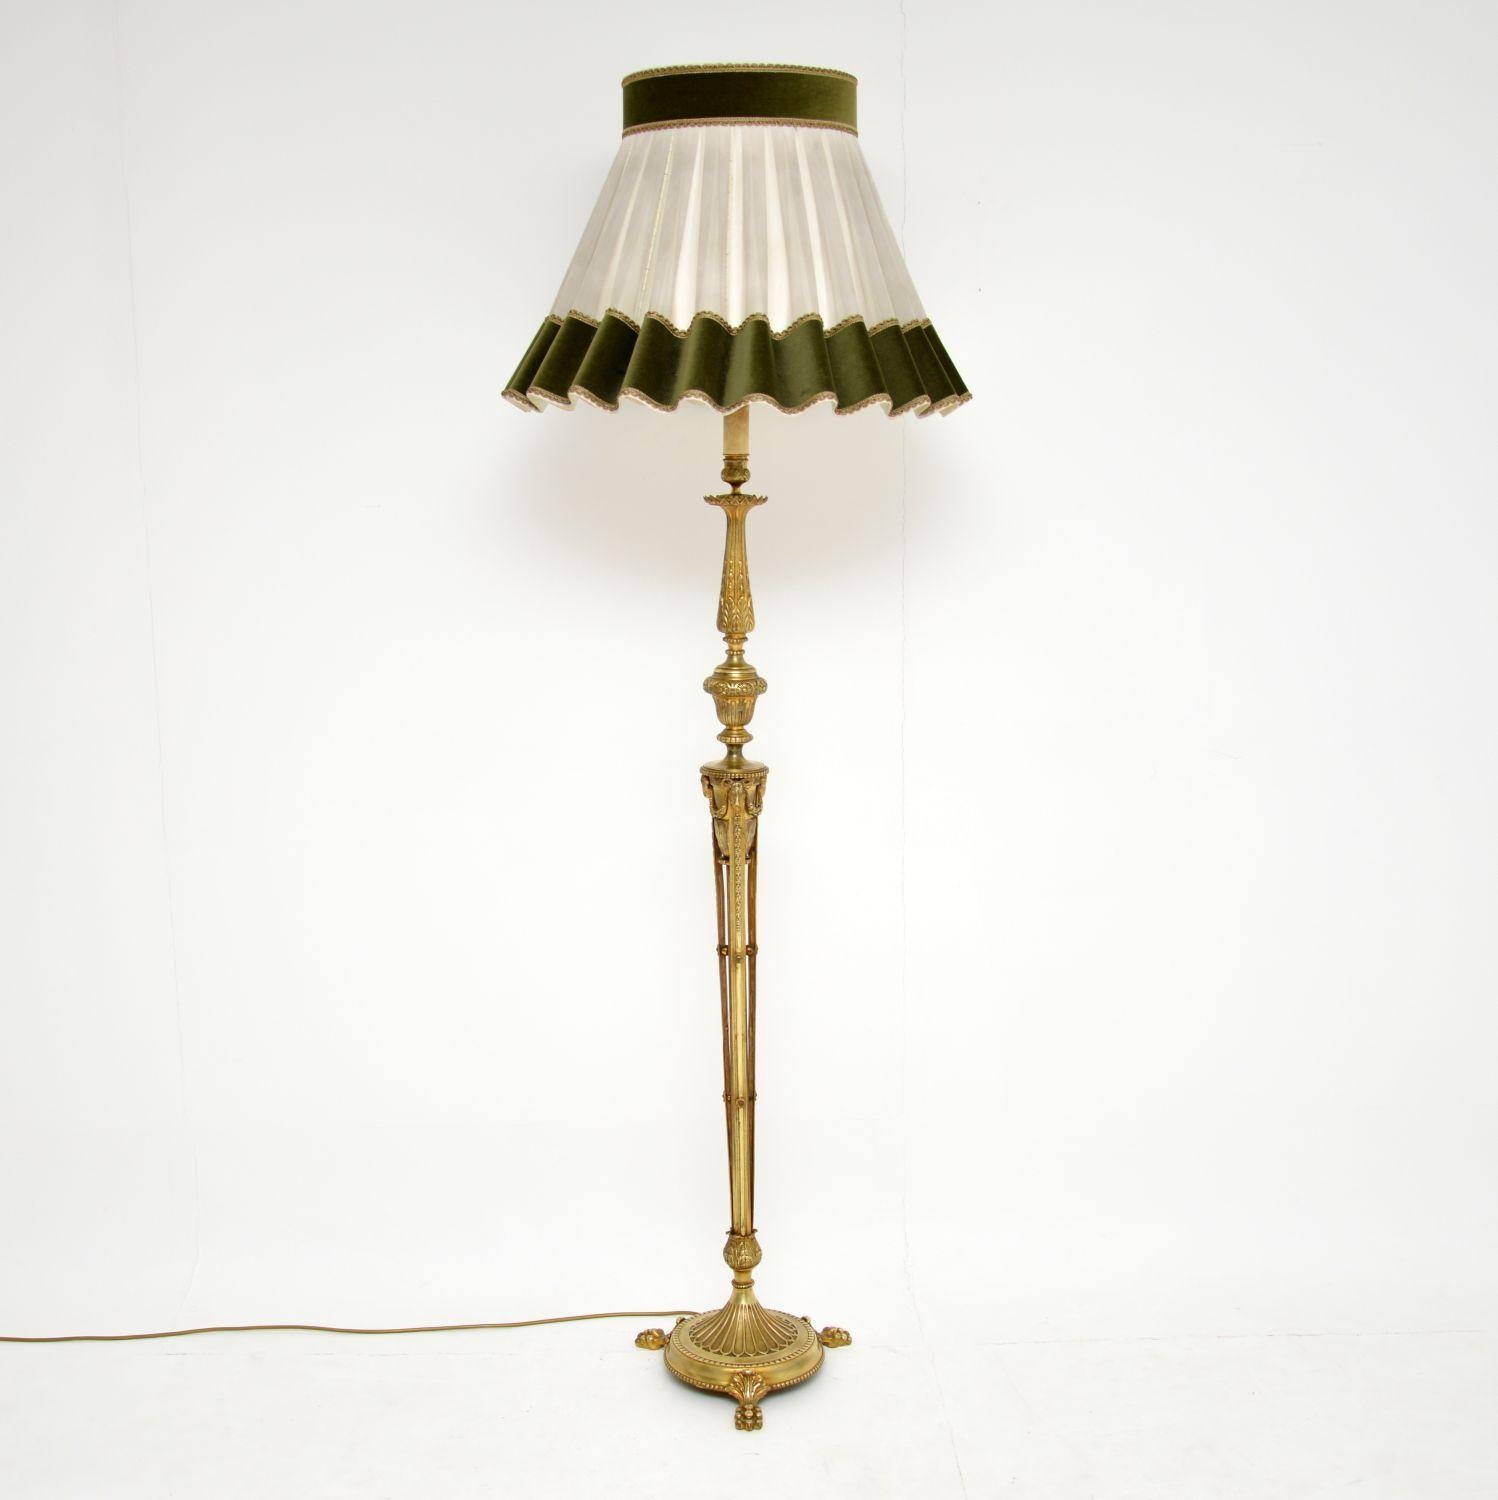 Antique French gilt brass floor lamp with many classical castings & applied decorations.

This lamp stand has been cleaned up & re-wired, so is in working condition & we have the lovely shade that came with it, which I think compliments it nicely.